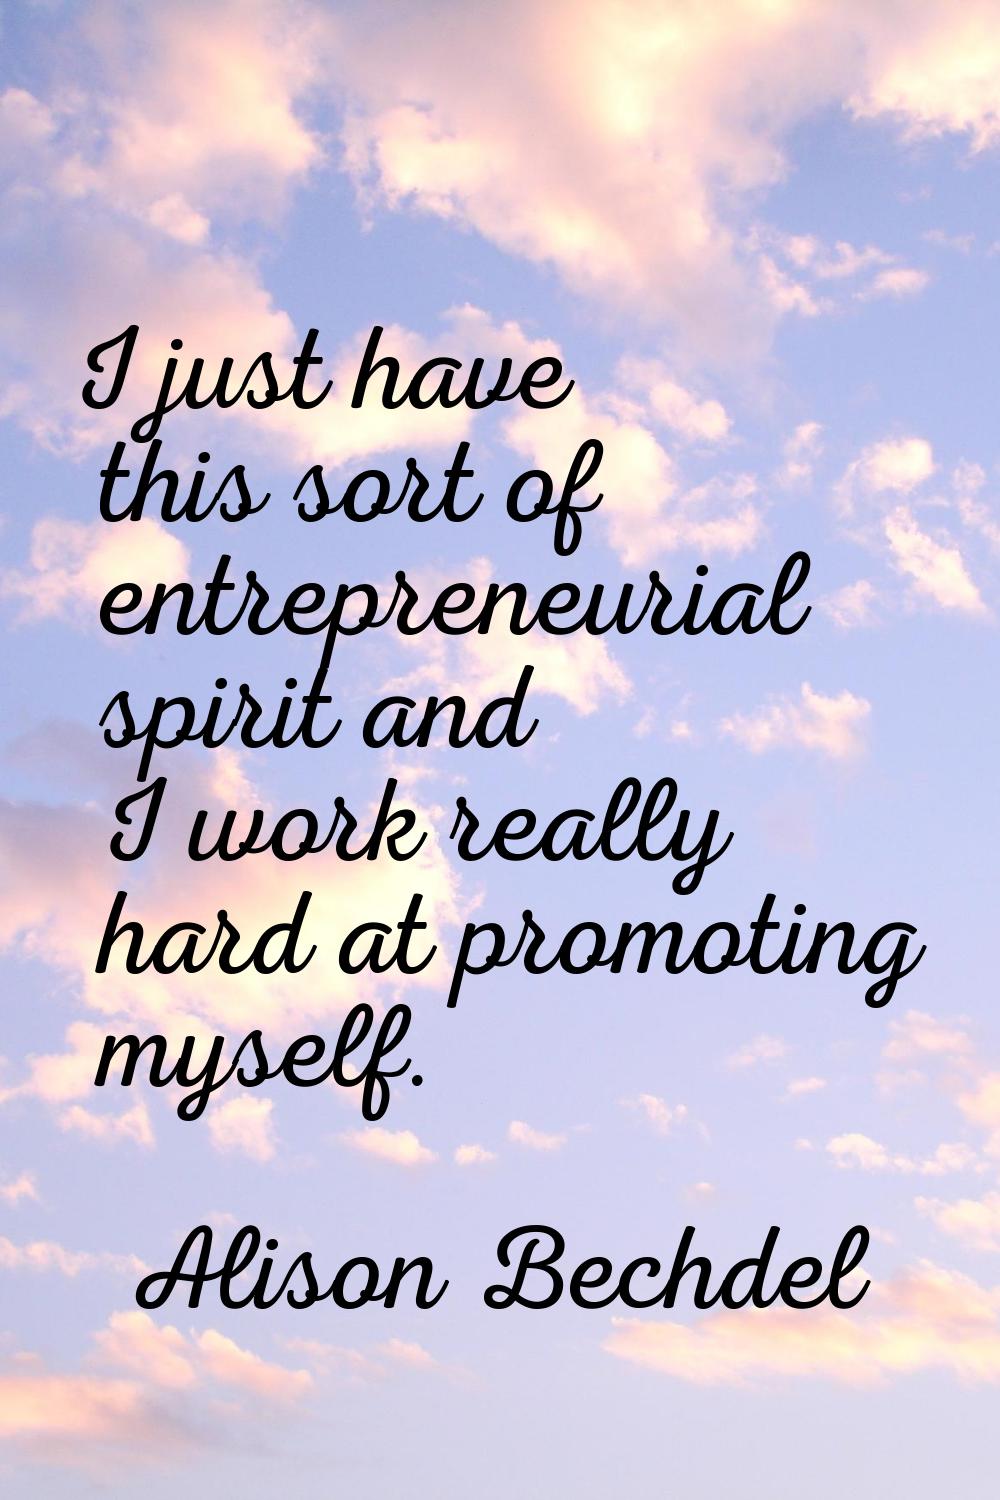 I just have this sort of entrepreneurial spirit and I work really hard at promoting myself.